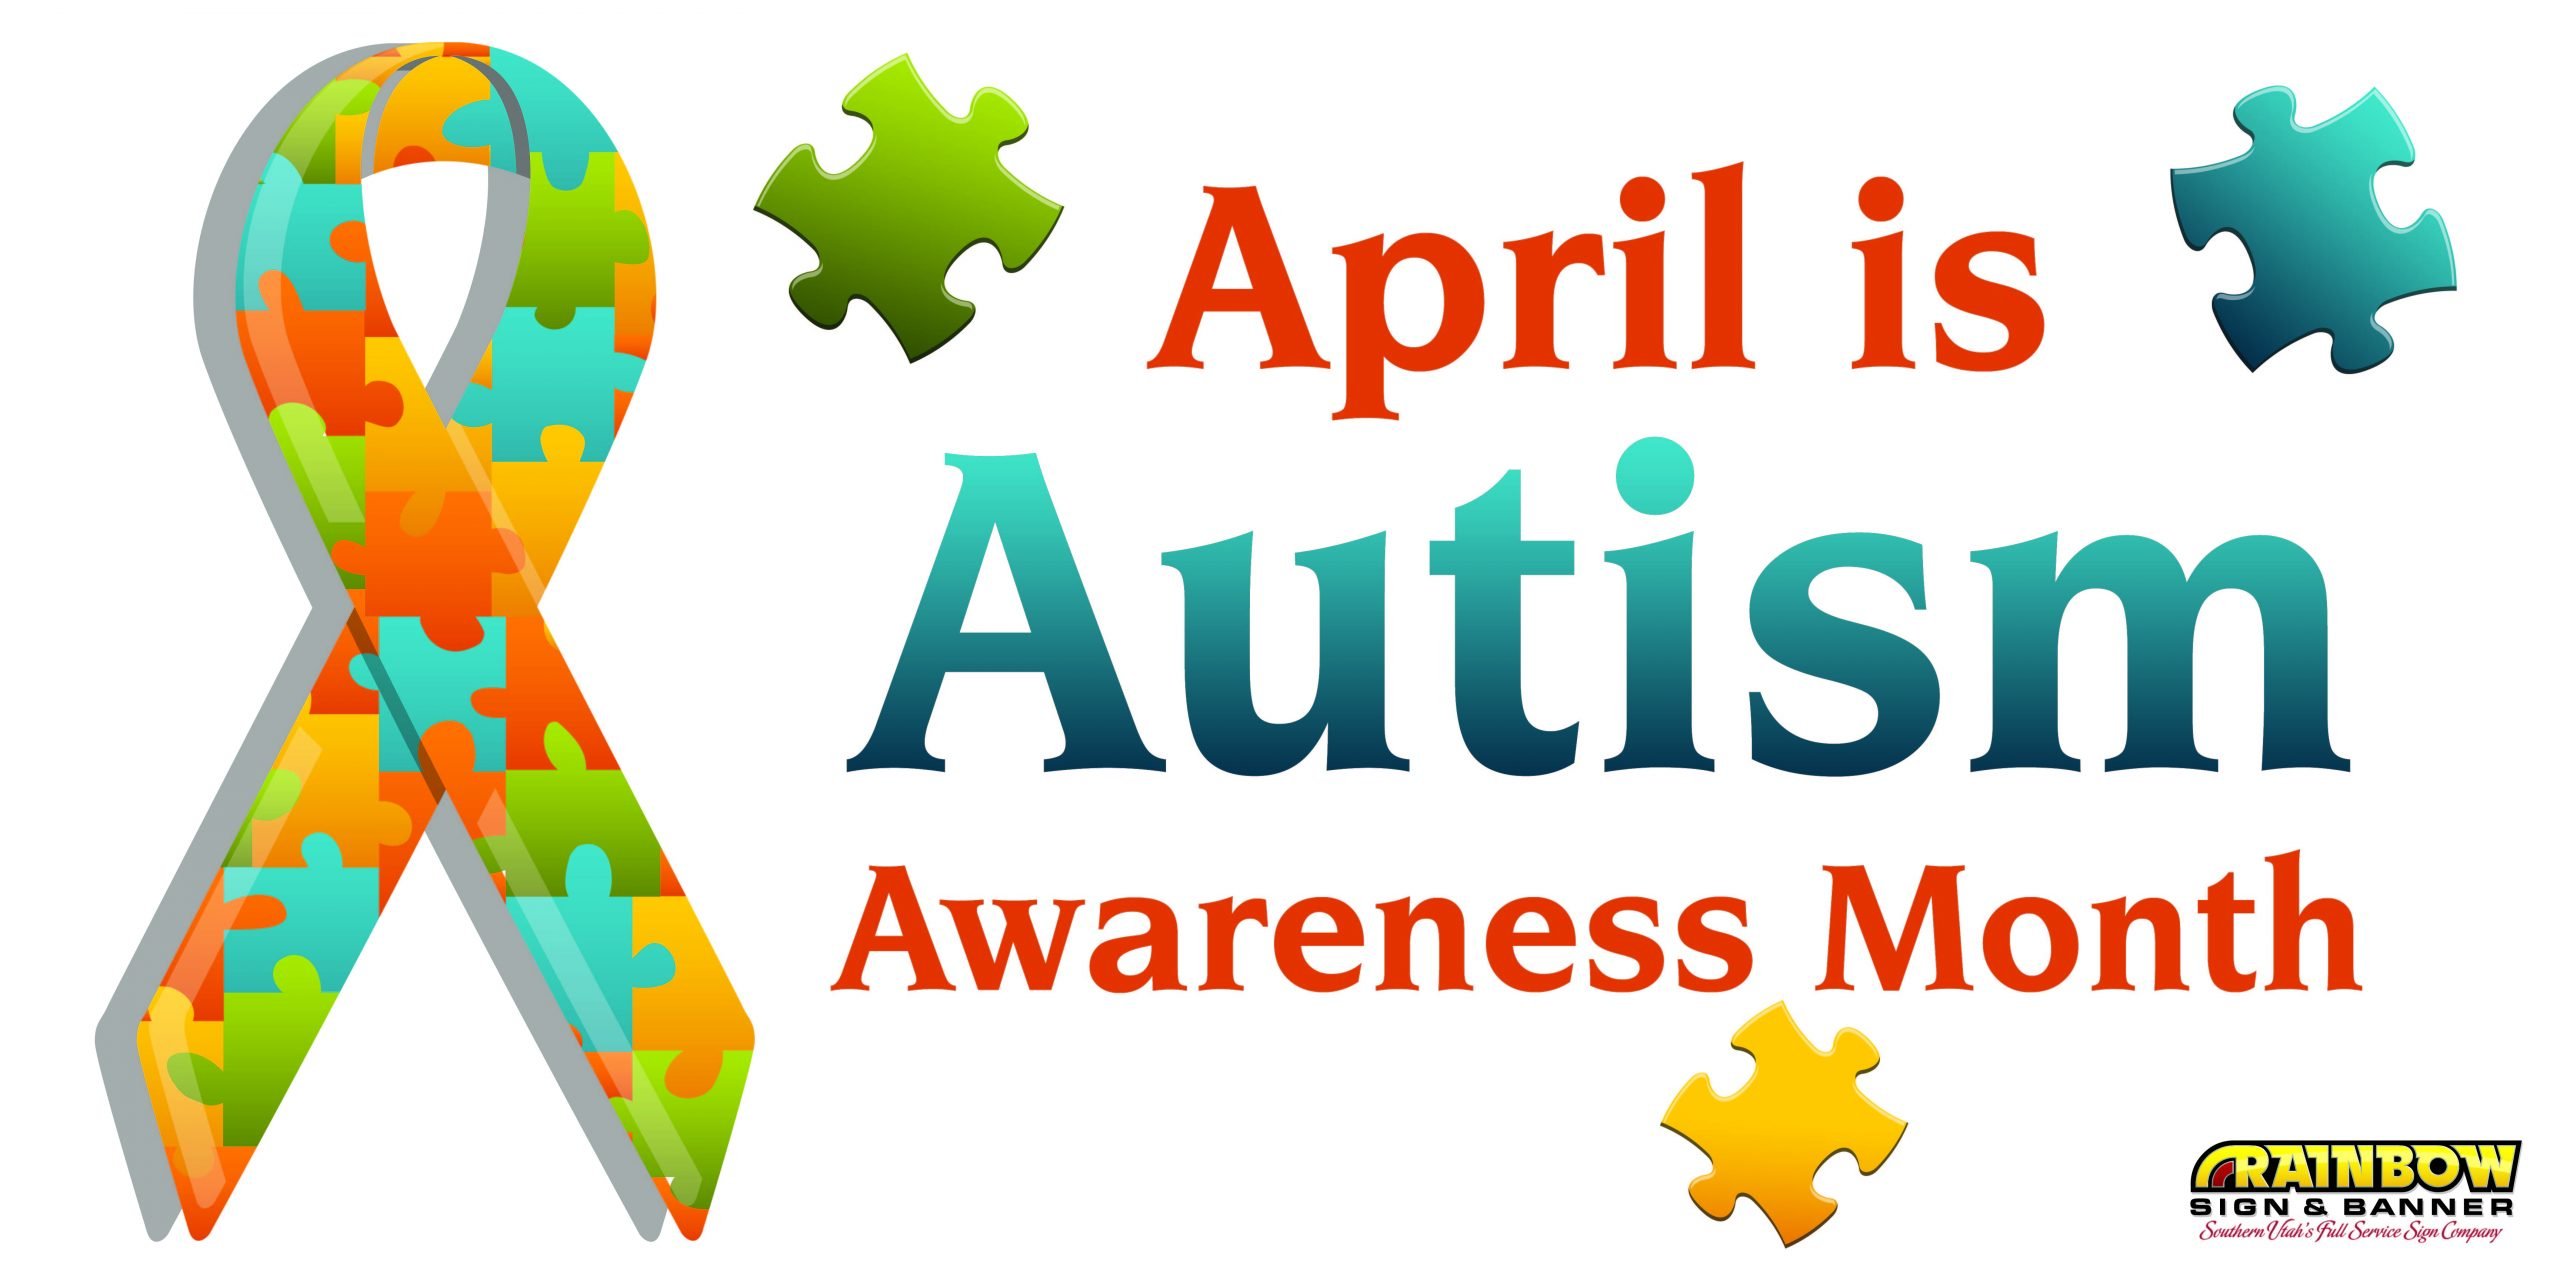 Submit your #Autism #Awareness Month story ...